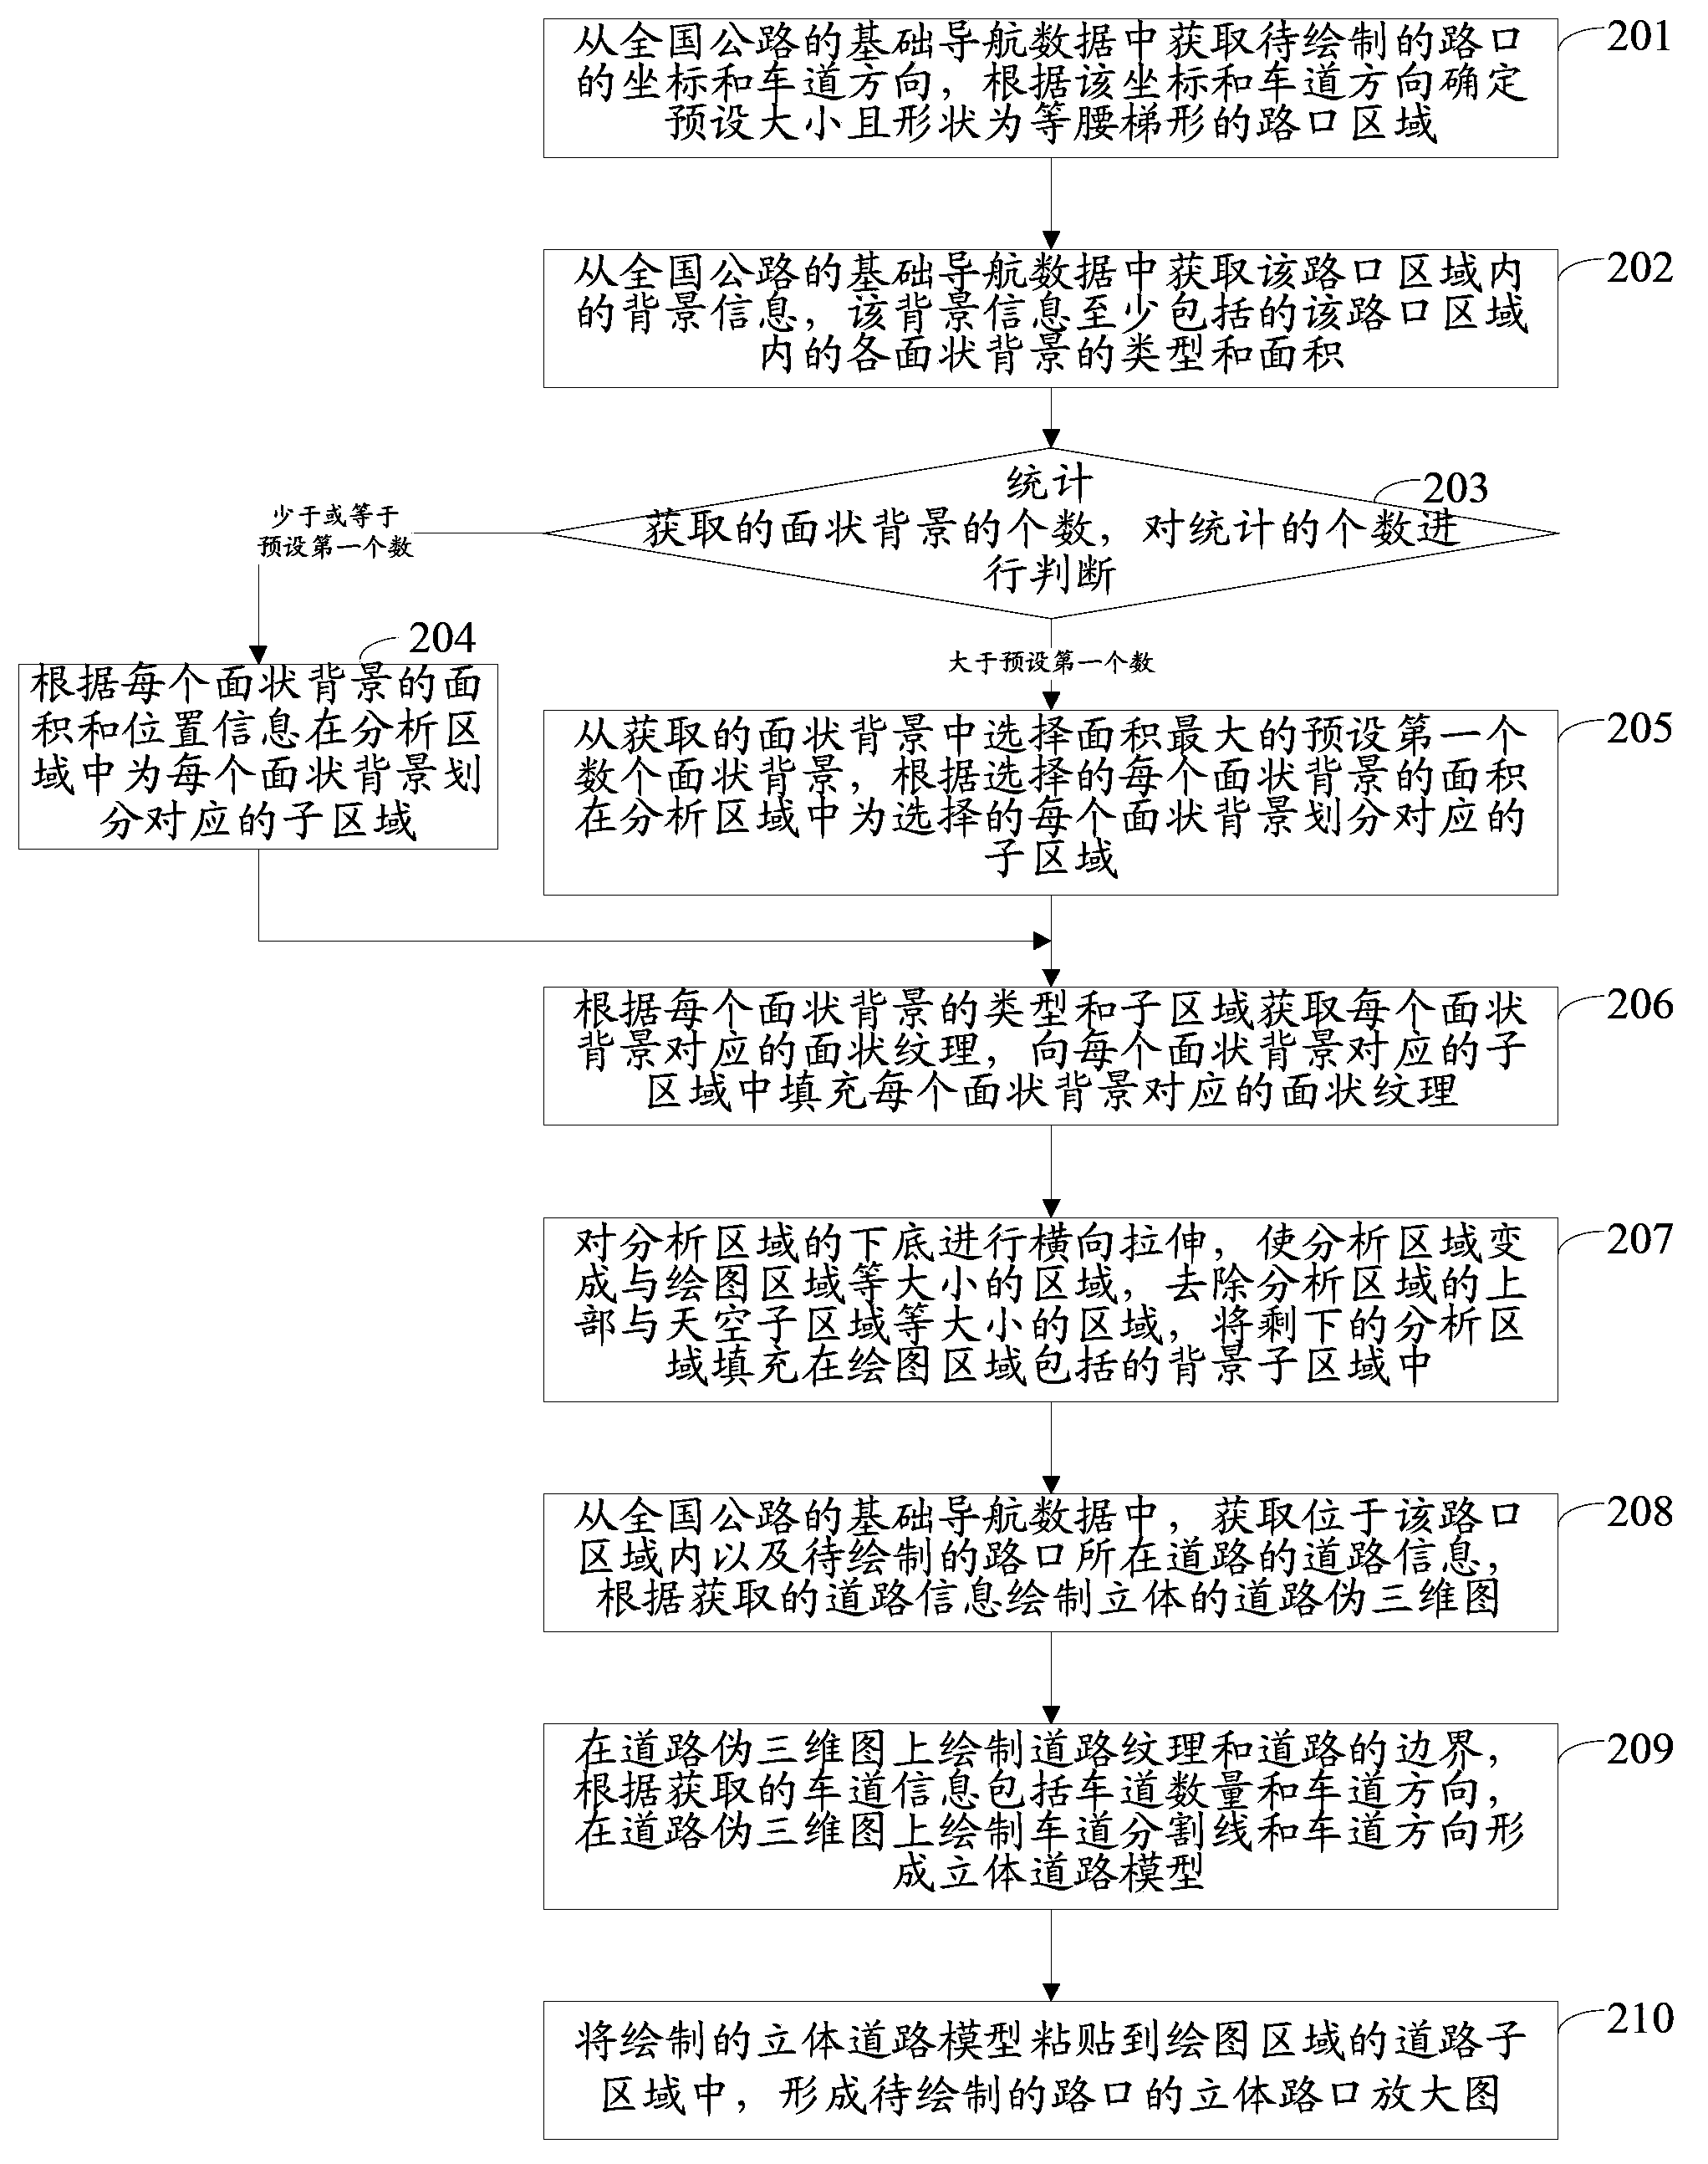 Method and device for drawing three-dimensional enlarged intersection image